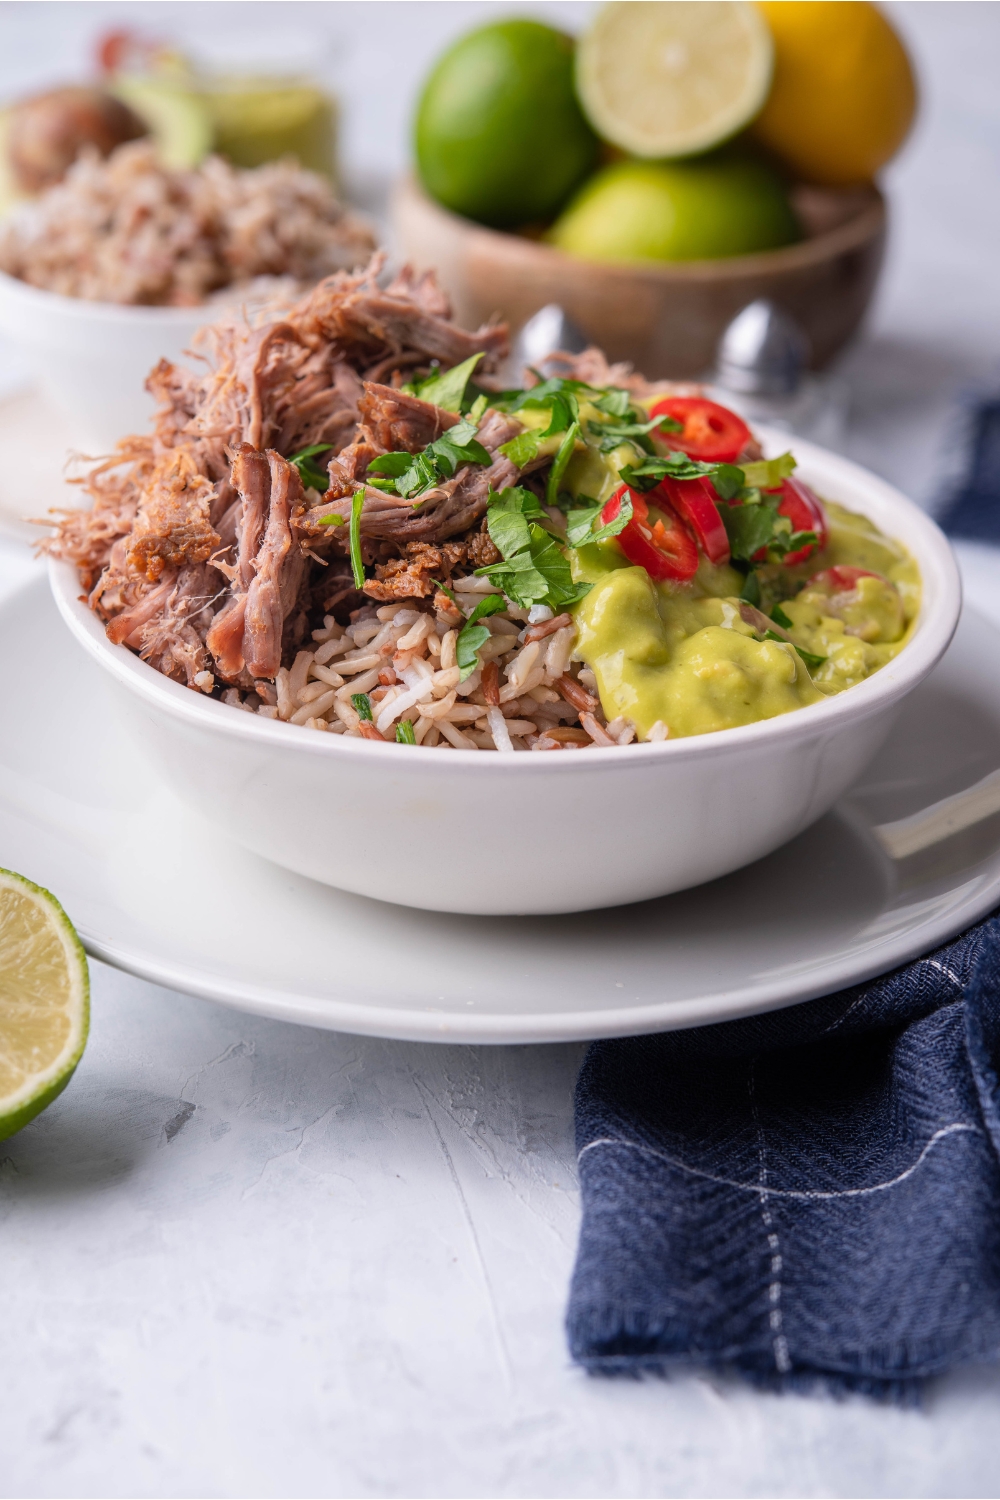 Shredded barbacoa in a bowl with brown rice, sliced peppers, guacamole, and fresh herbs.